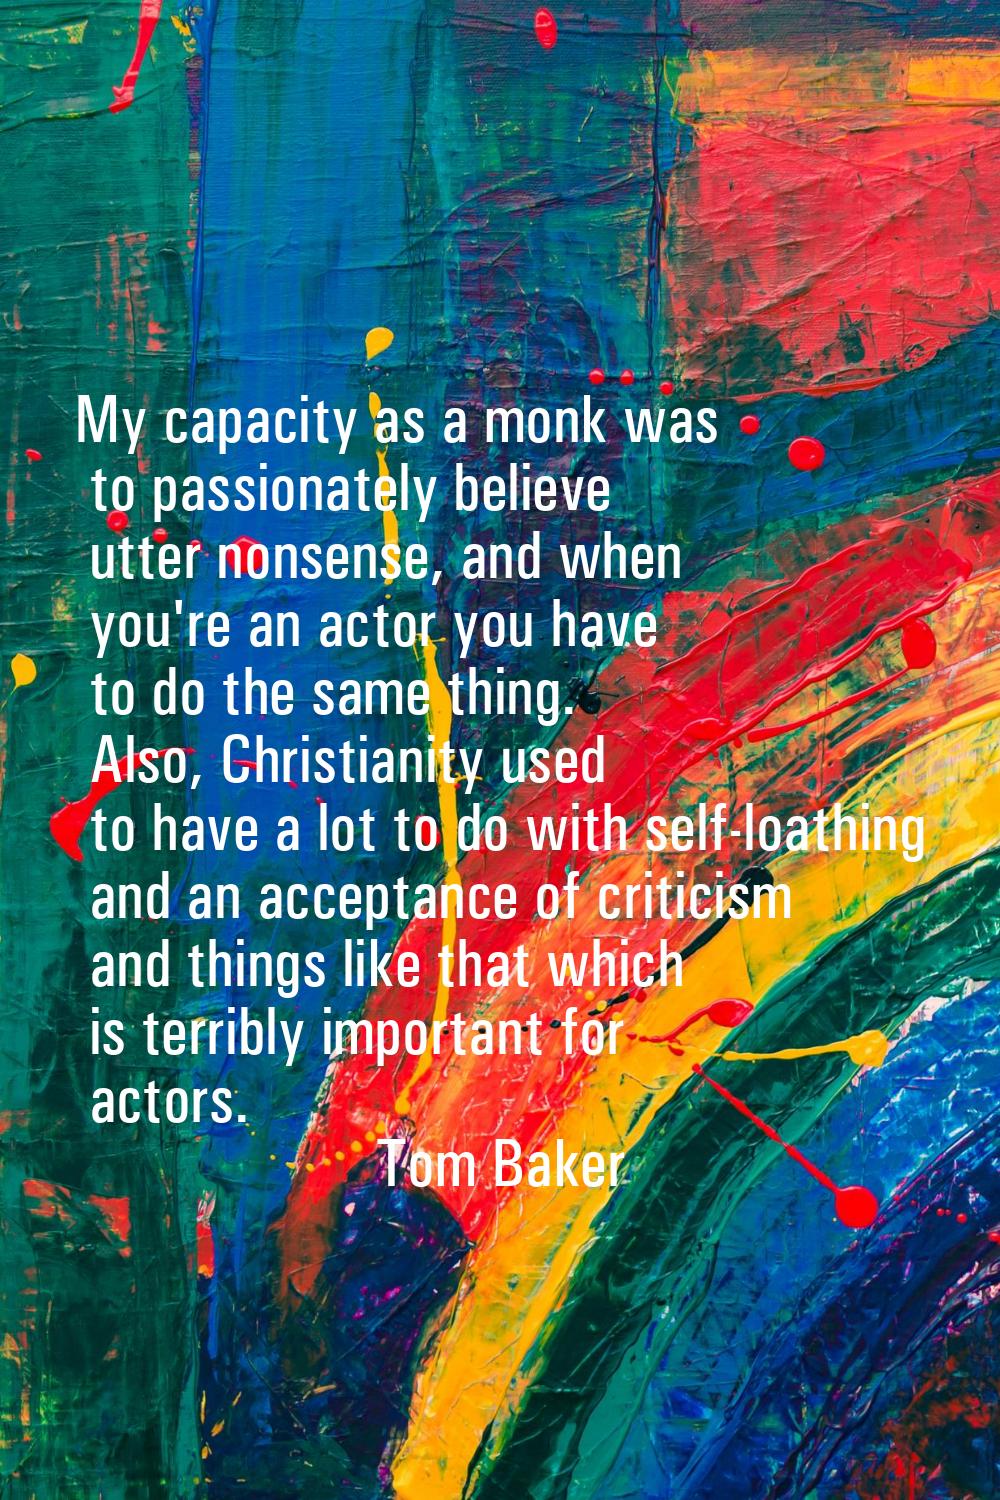 My capacity as a monk was to passionately believe utter nonsense, and when you're an actor you have